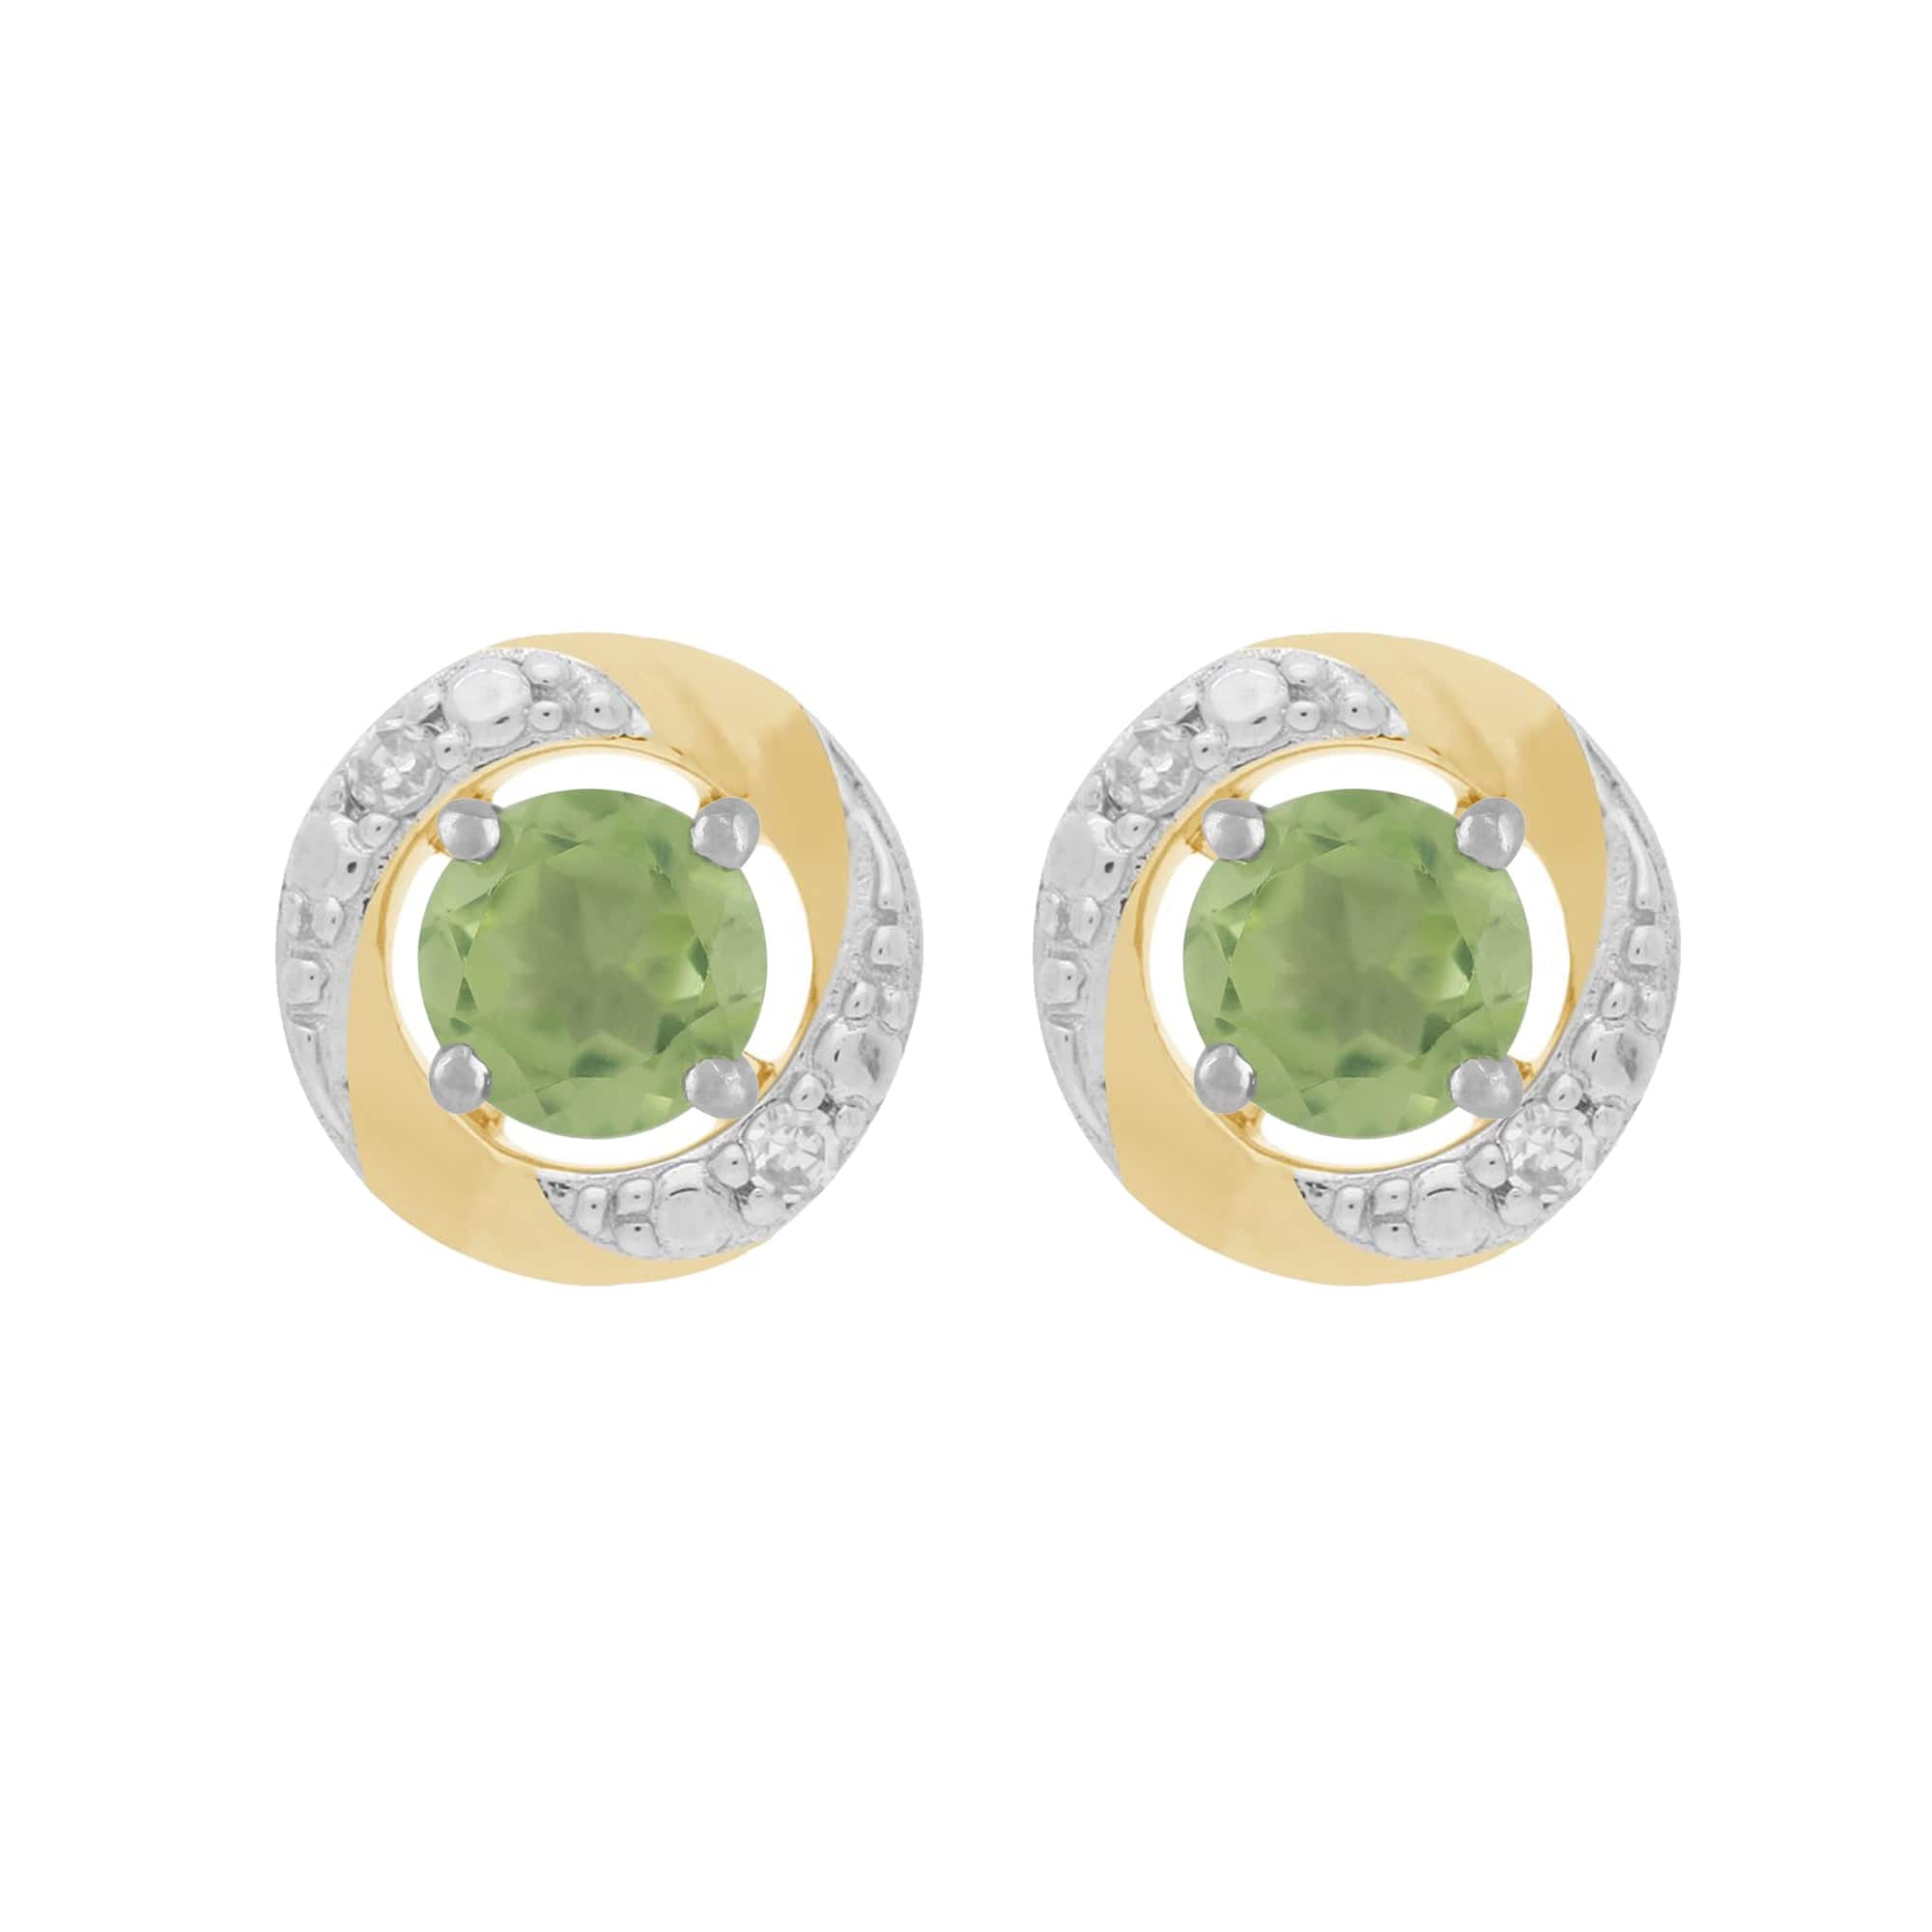 11614-191E0374019 9ct White Gold Peridot Stud Earrings with Detachable Diamond Halo Ear Jacket in 9ct Yellow Gold 1